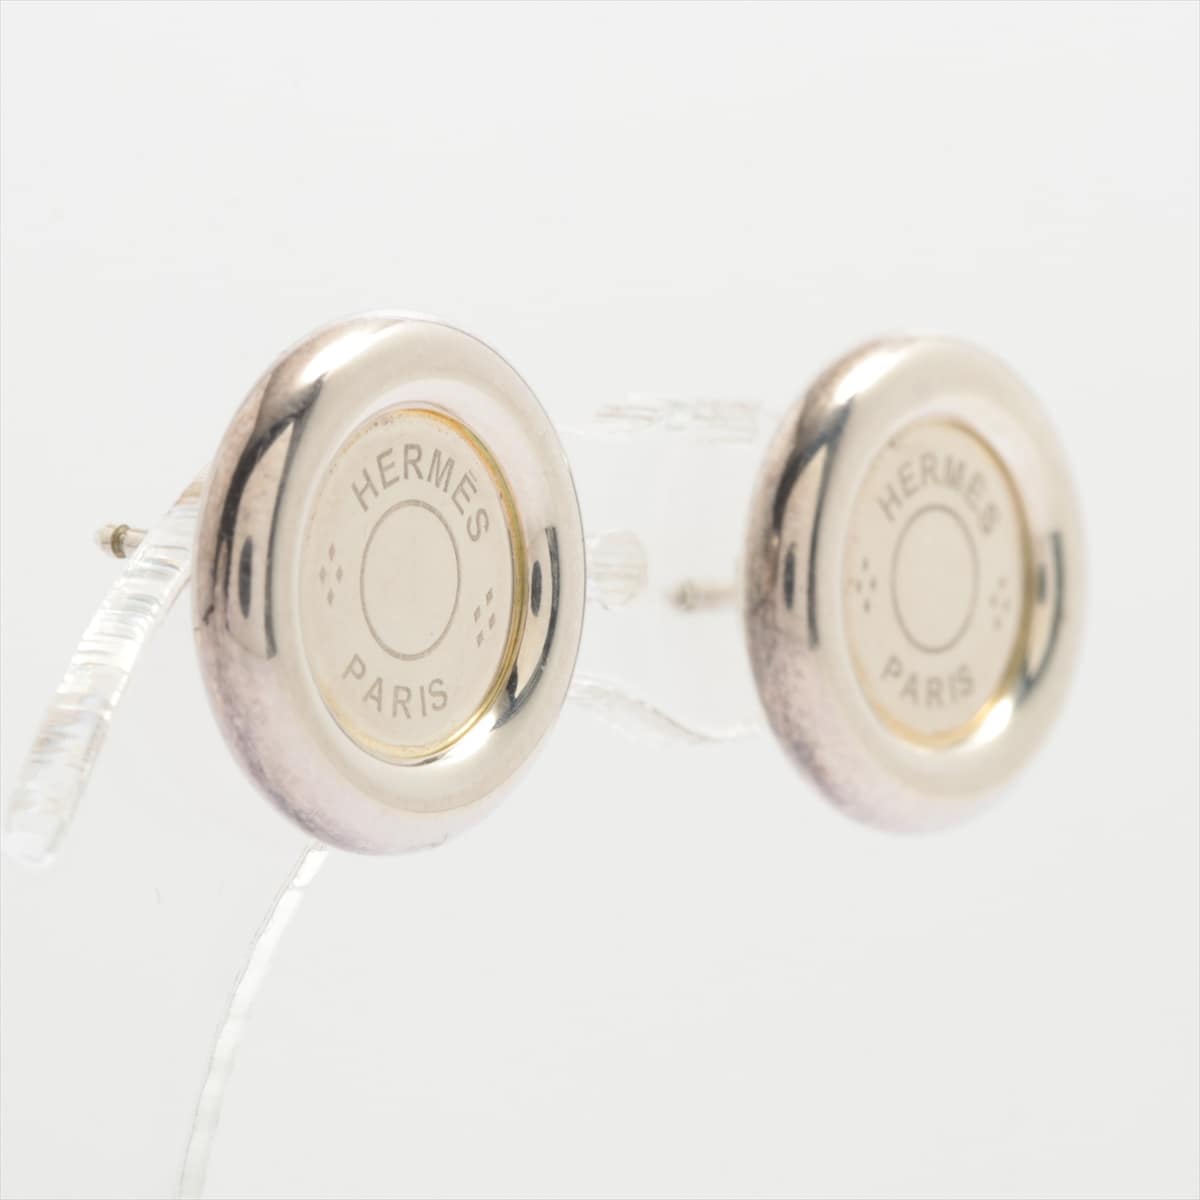 Hermès Serie Piercing jewelry (for both ears) 925 4.5g Silver